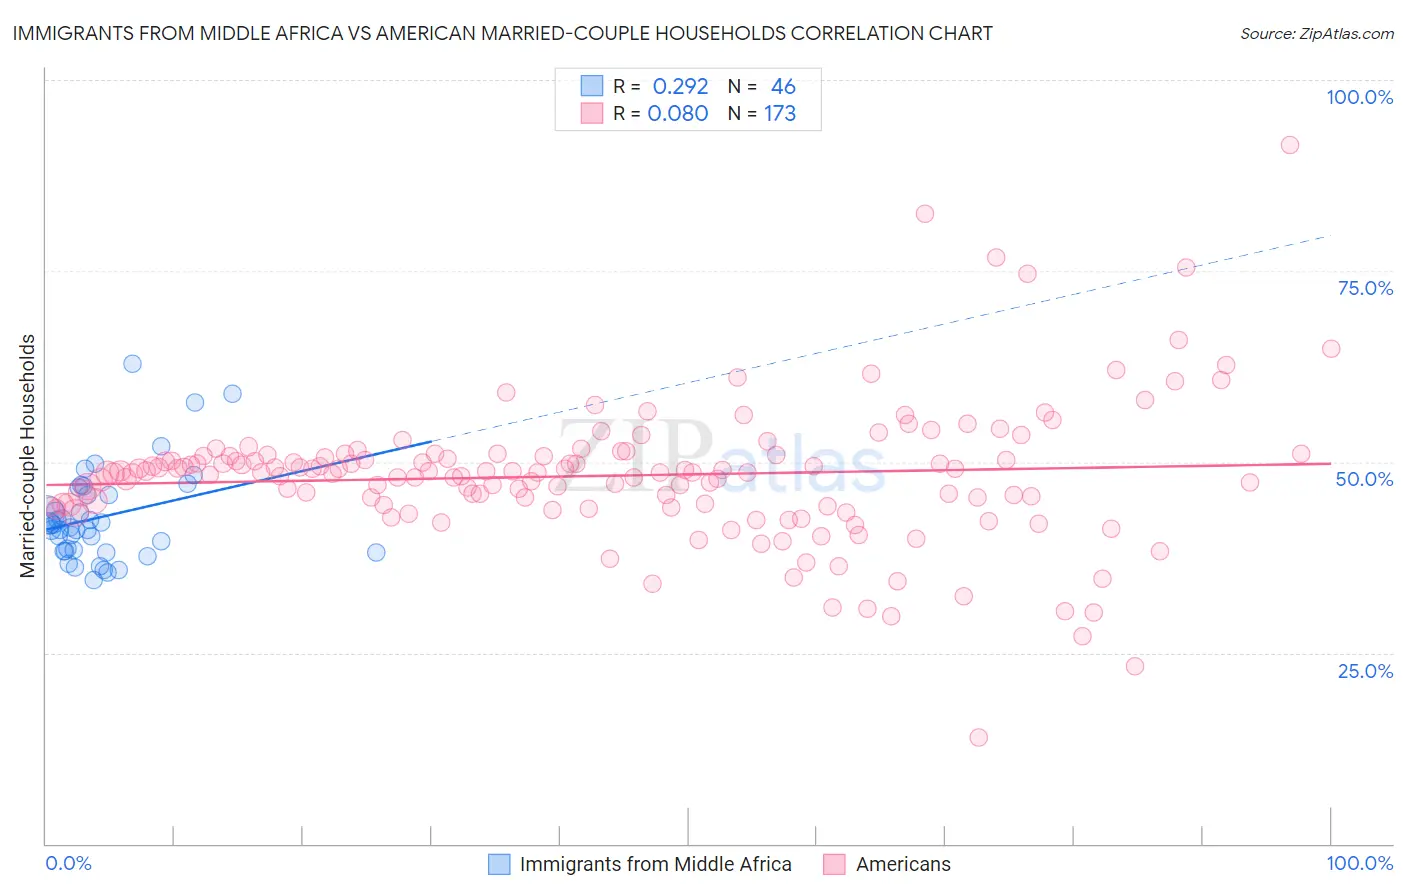 Immigrants from Middle Africa vs American Married-couple Households